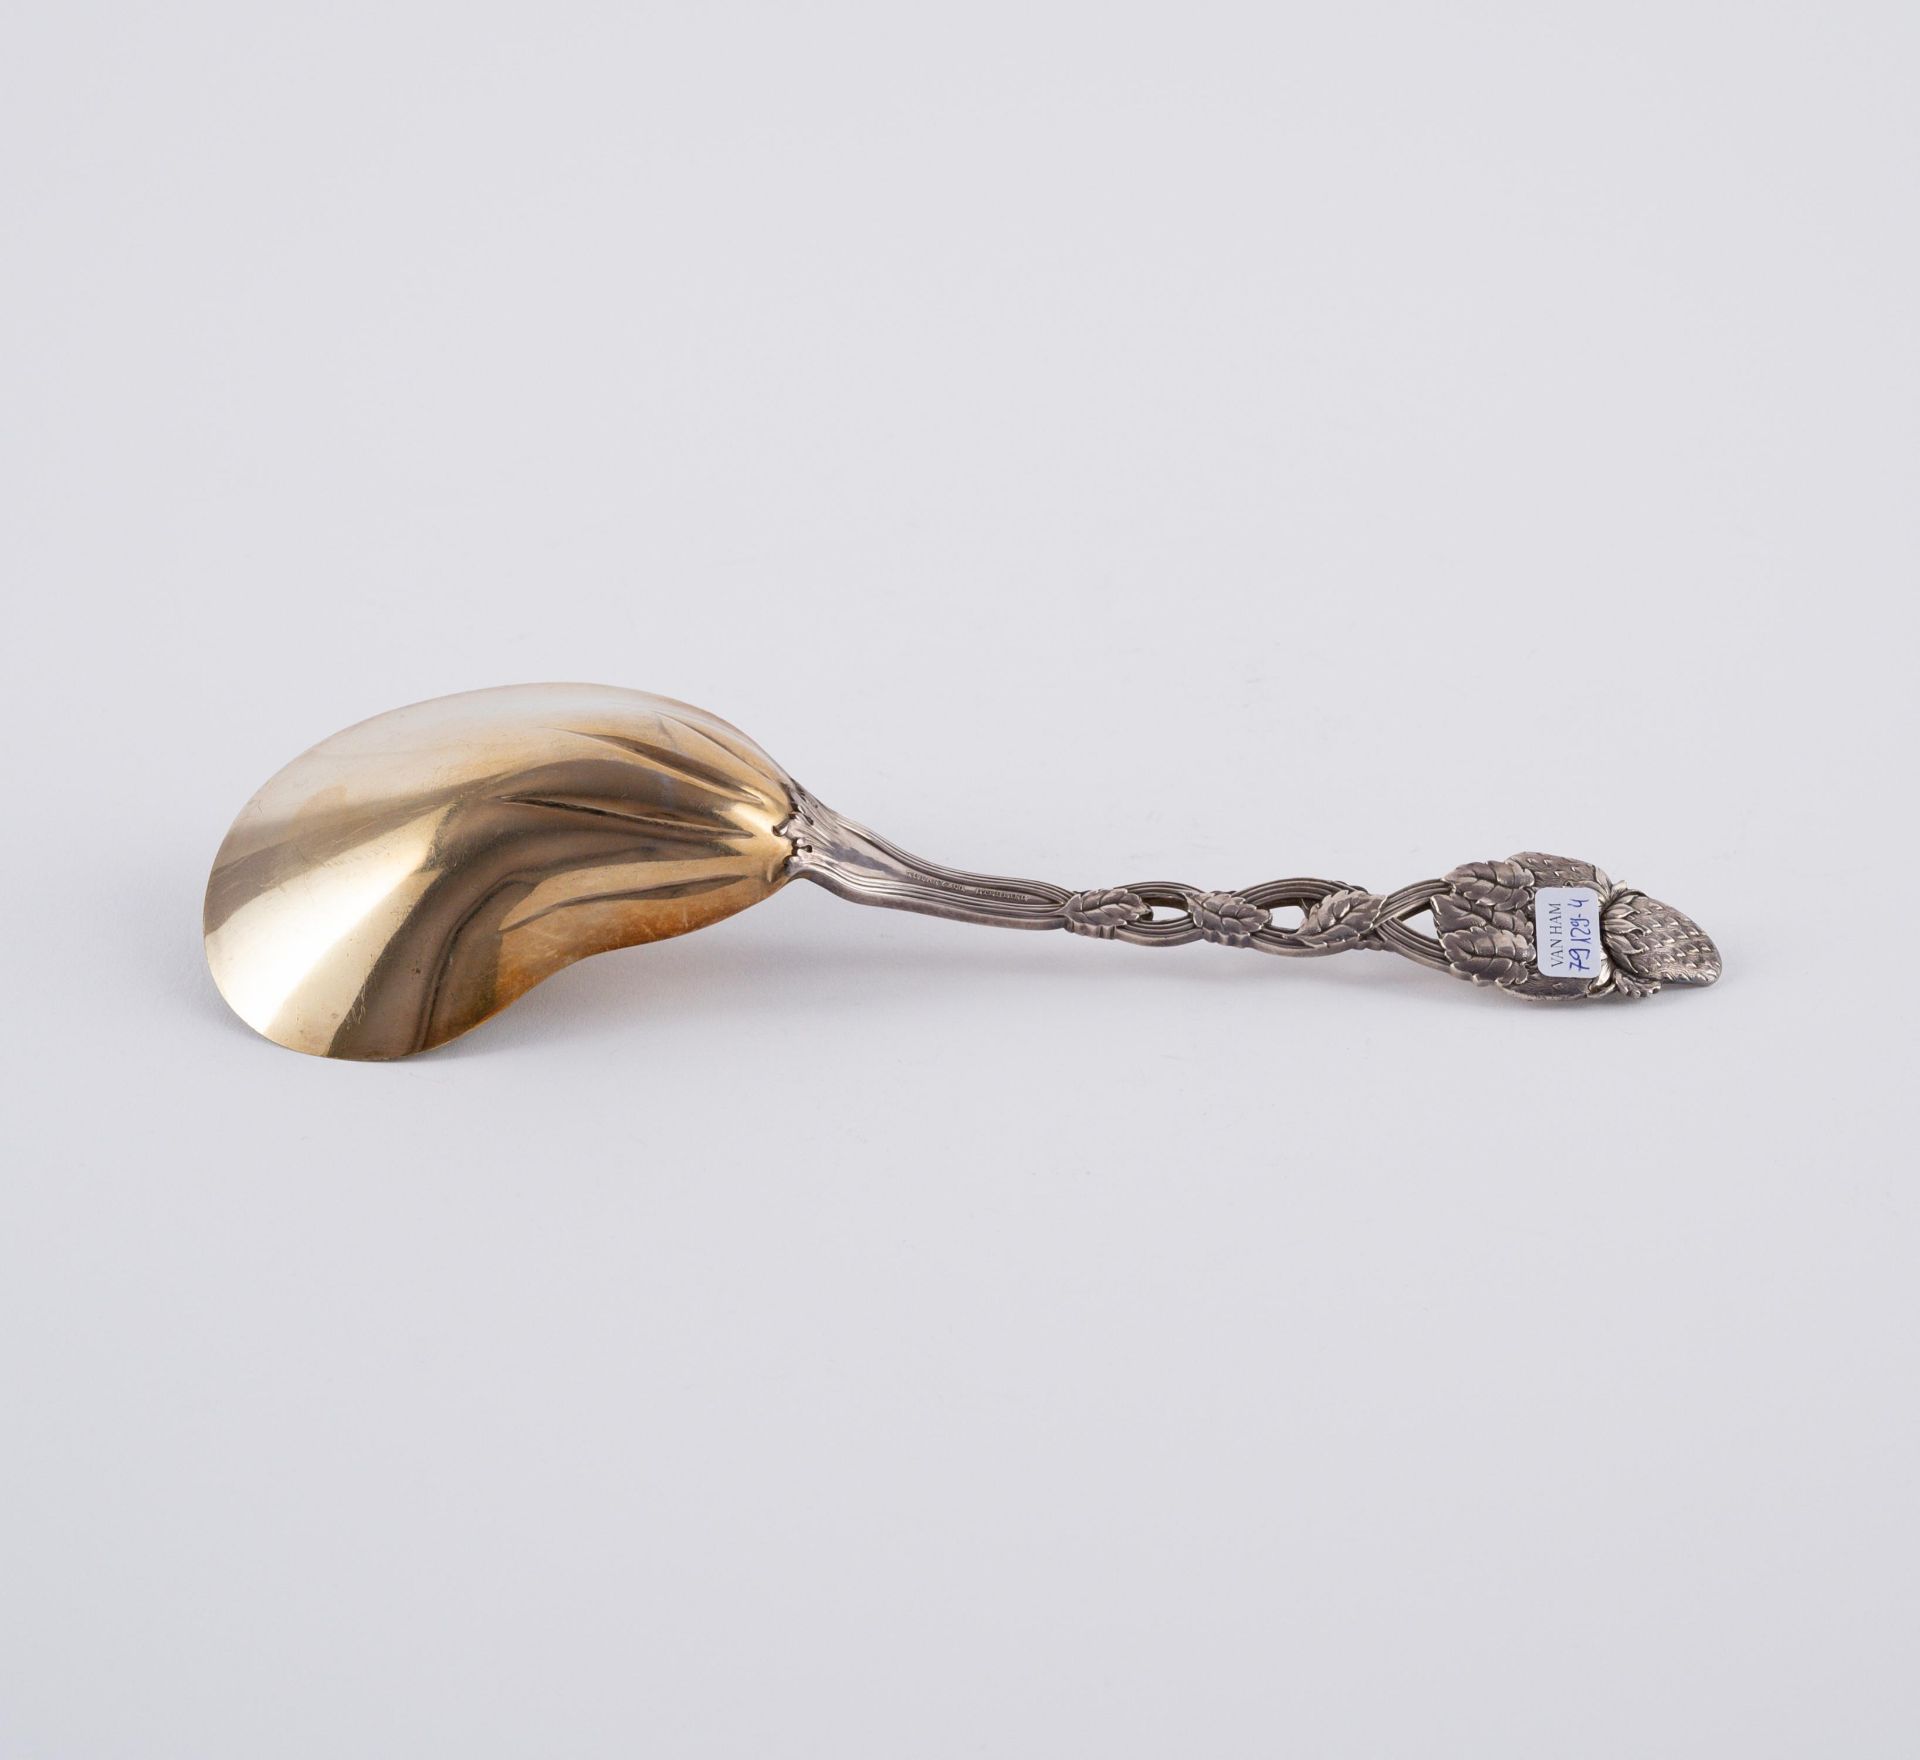 1 LARGE SILVER BERRY SPOON WITH STRAWBERRY DECOR - Image 3 of 3